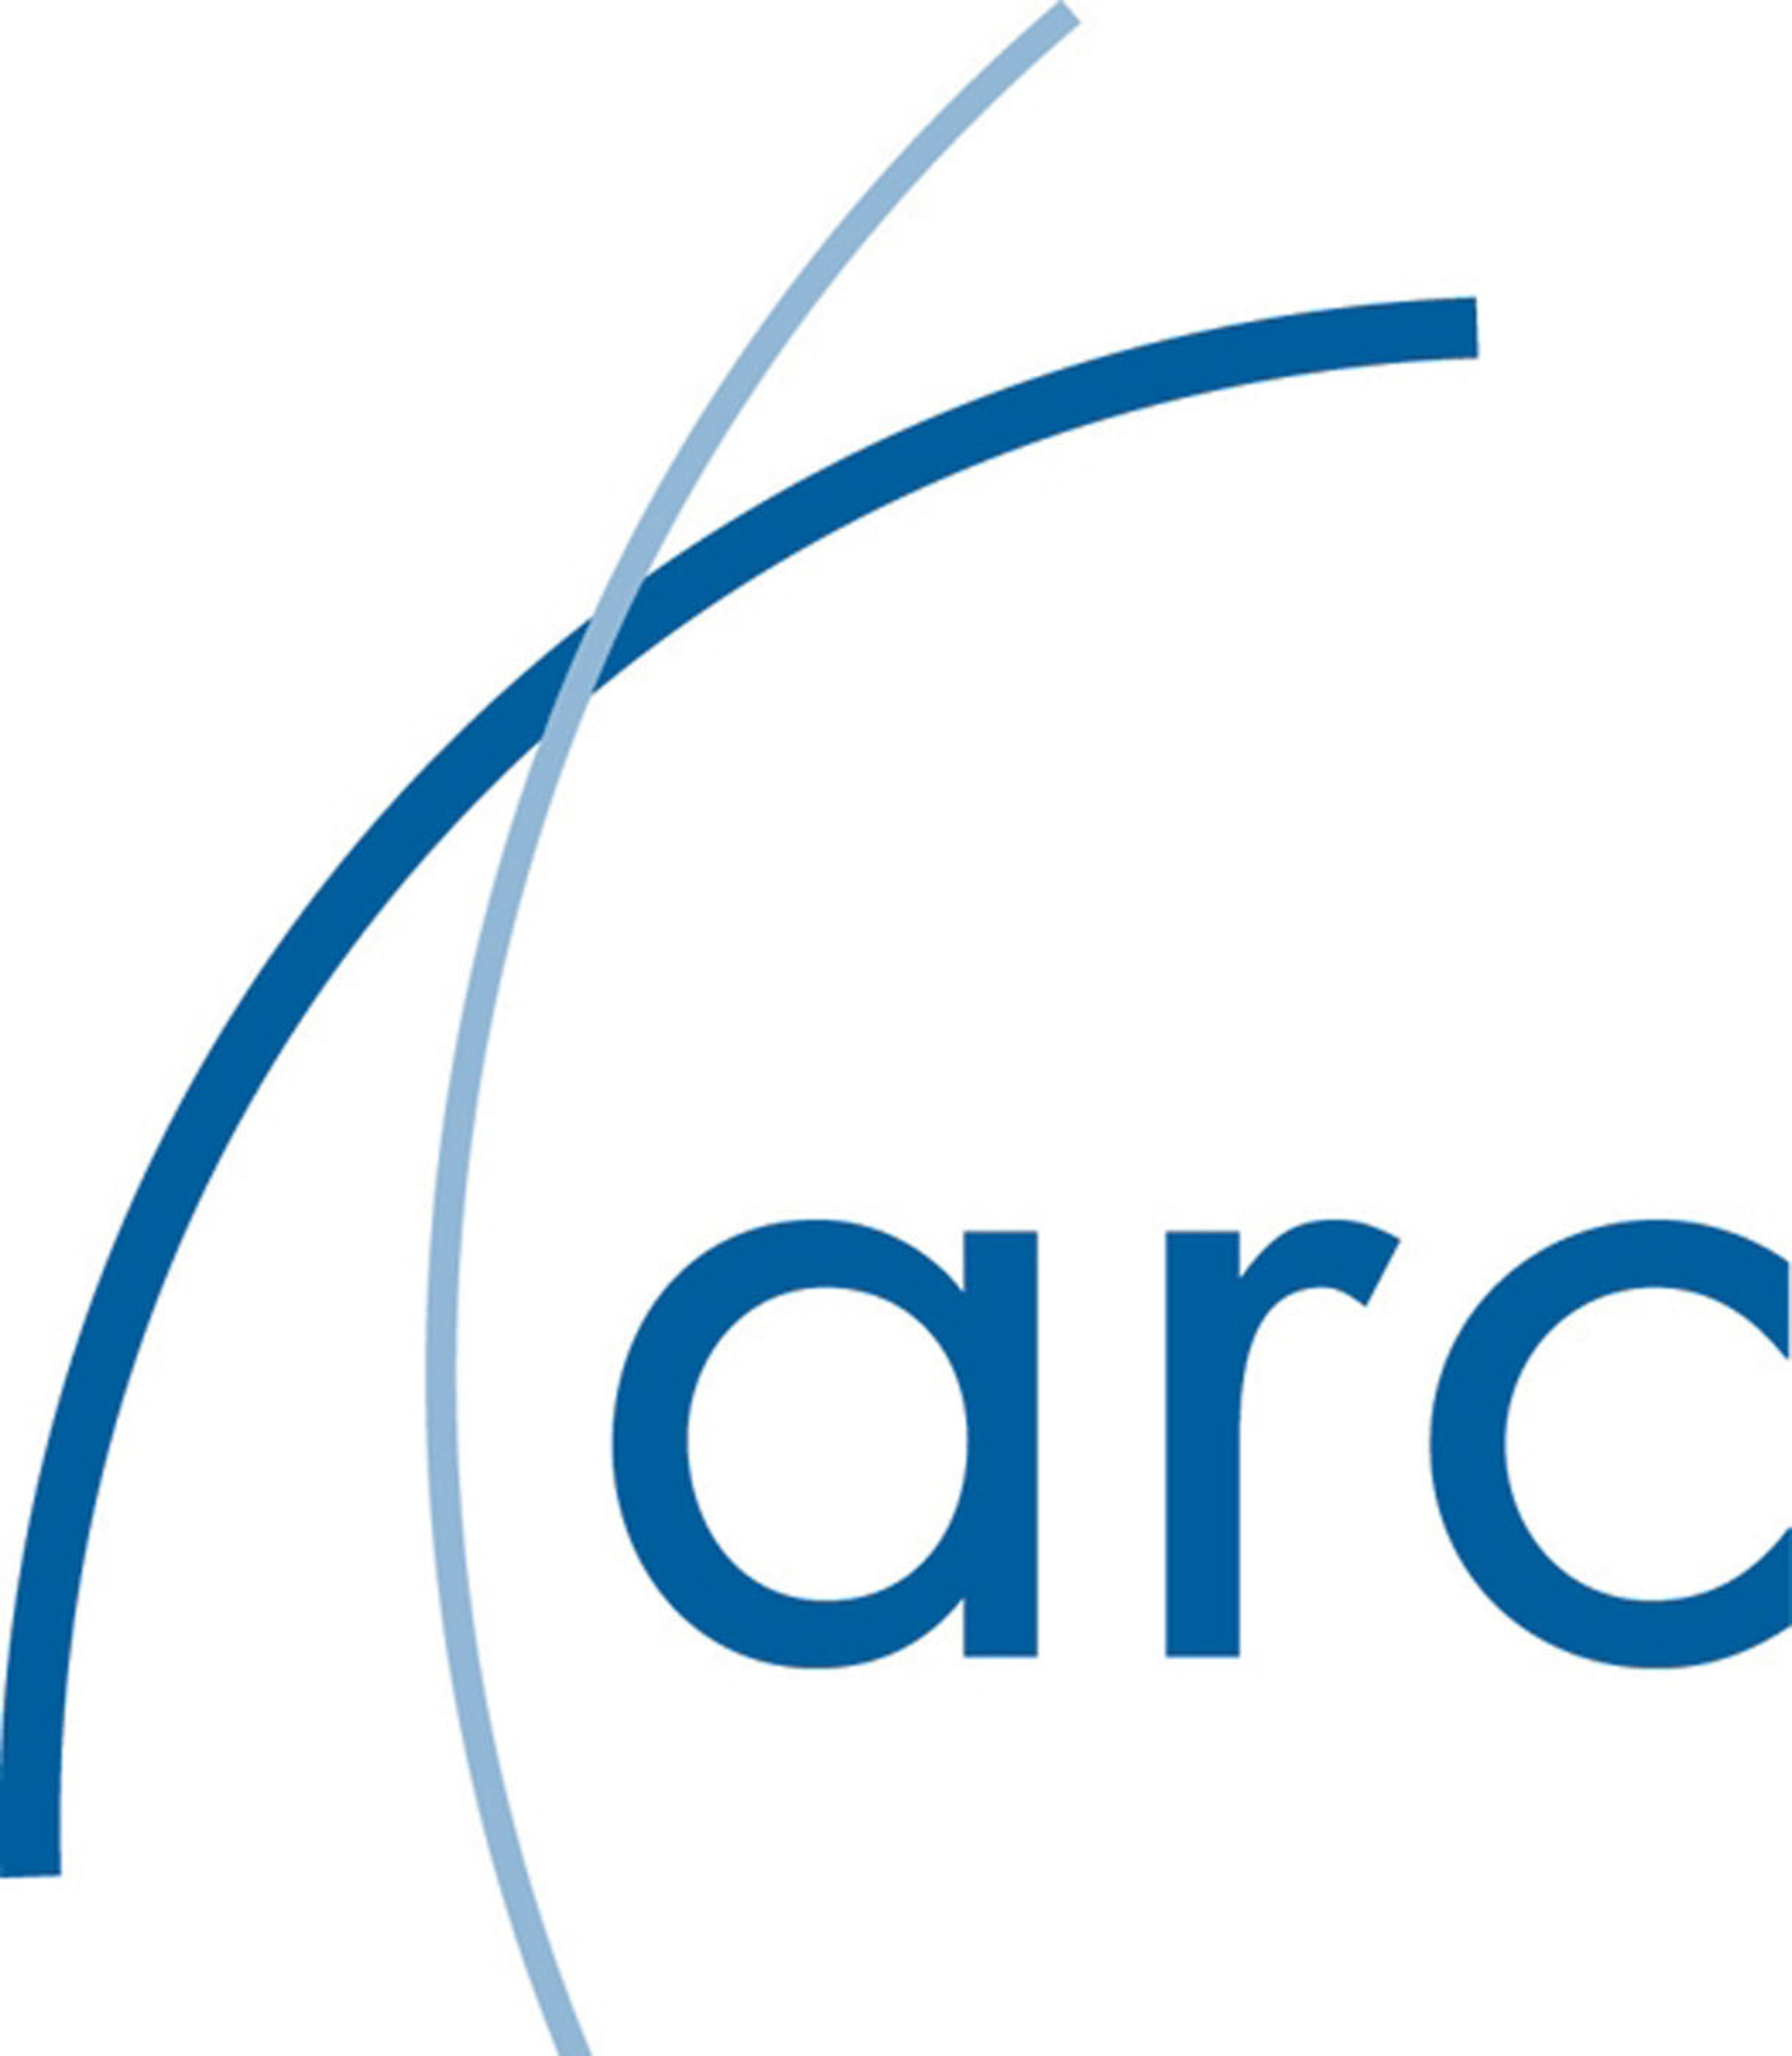 As the financial backbone of the U.S. travel industry, ARC enables commerce among travel agencies, airlines, and travel suppliers, and offers them secure and accurate financial settlement services. About 16,000 travel agencies and 190 airlines make up the ARC network. In 2011, ARC settled more than $82 billion worth of transactions between travel sellers and airlines. ARC also supplies transactional data to organizations, facilitating better business decisions through fact-based market analyses. Established in 1984, ARC is headquartered in Arlington, Va. For more information, visit  www.arccorp.com . (PRNewsFoto/ARC) (PRNewsFoto/)